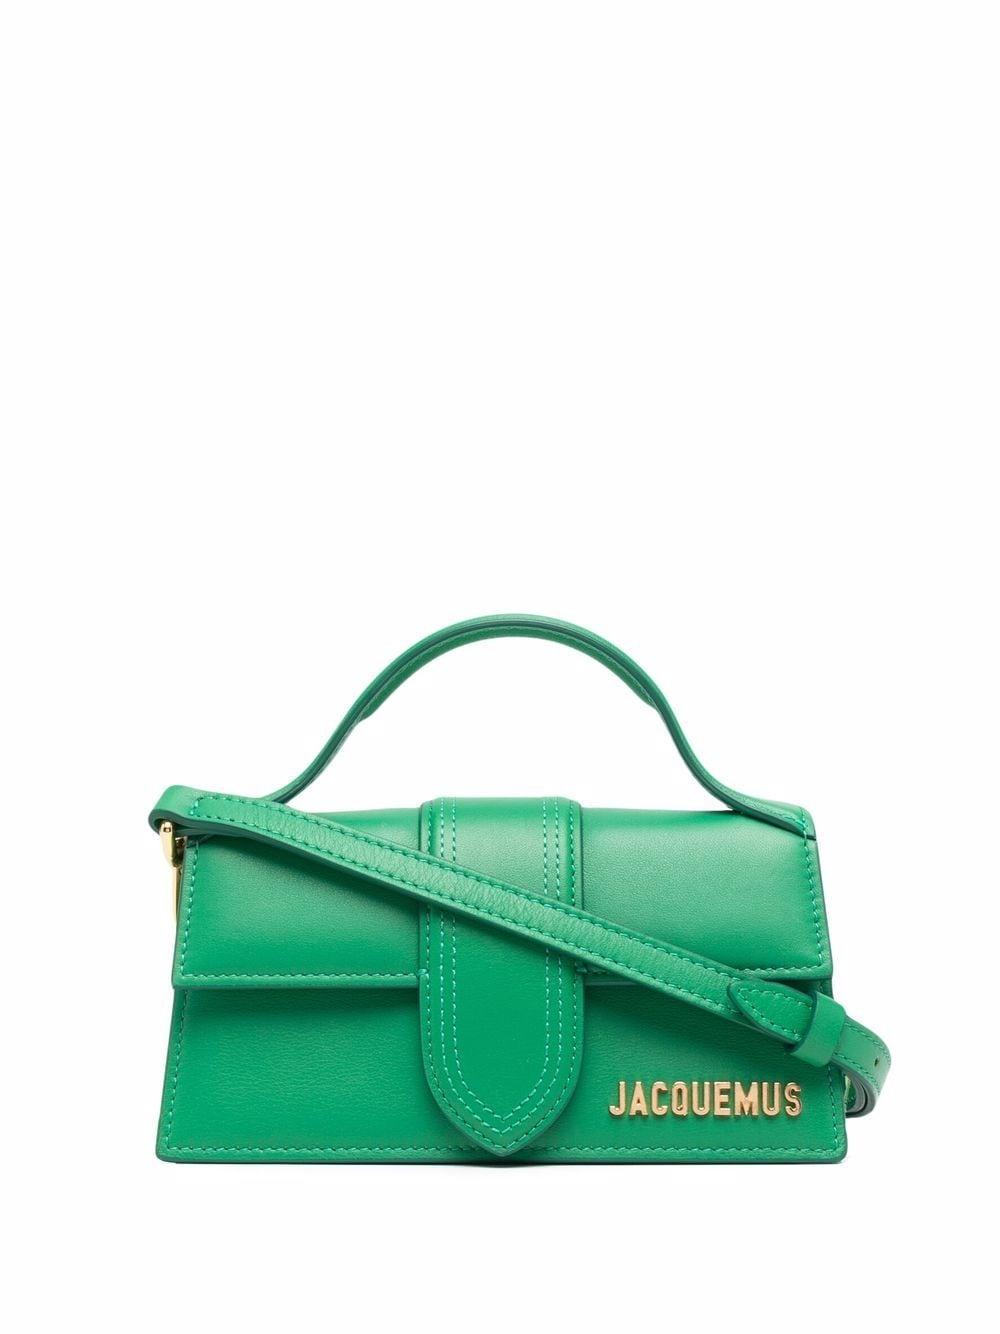 Jacquemus Le Bambino Bag in Green | Lyst